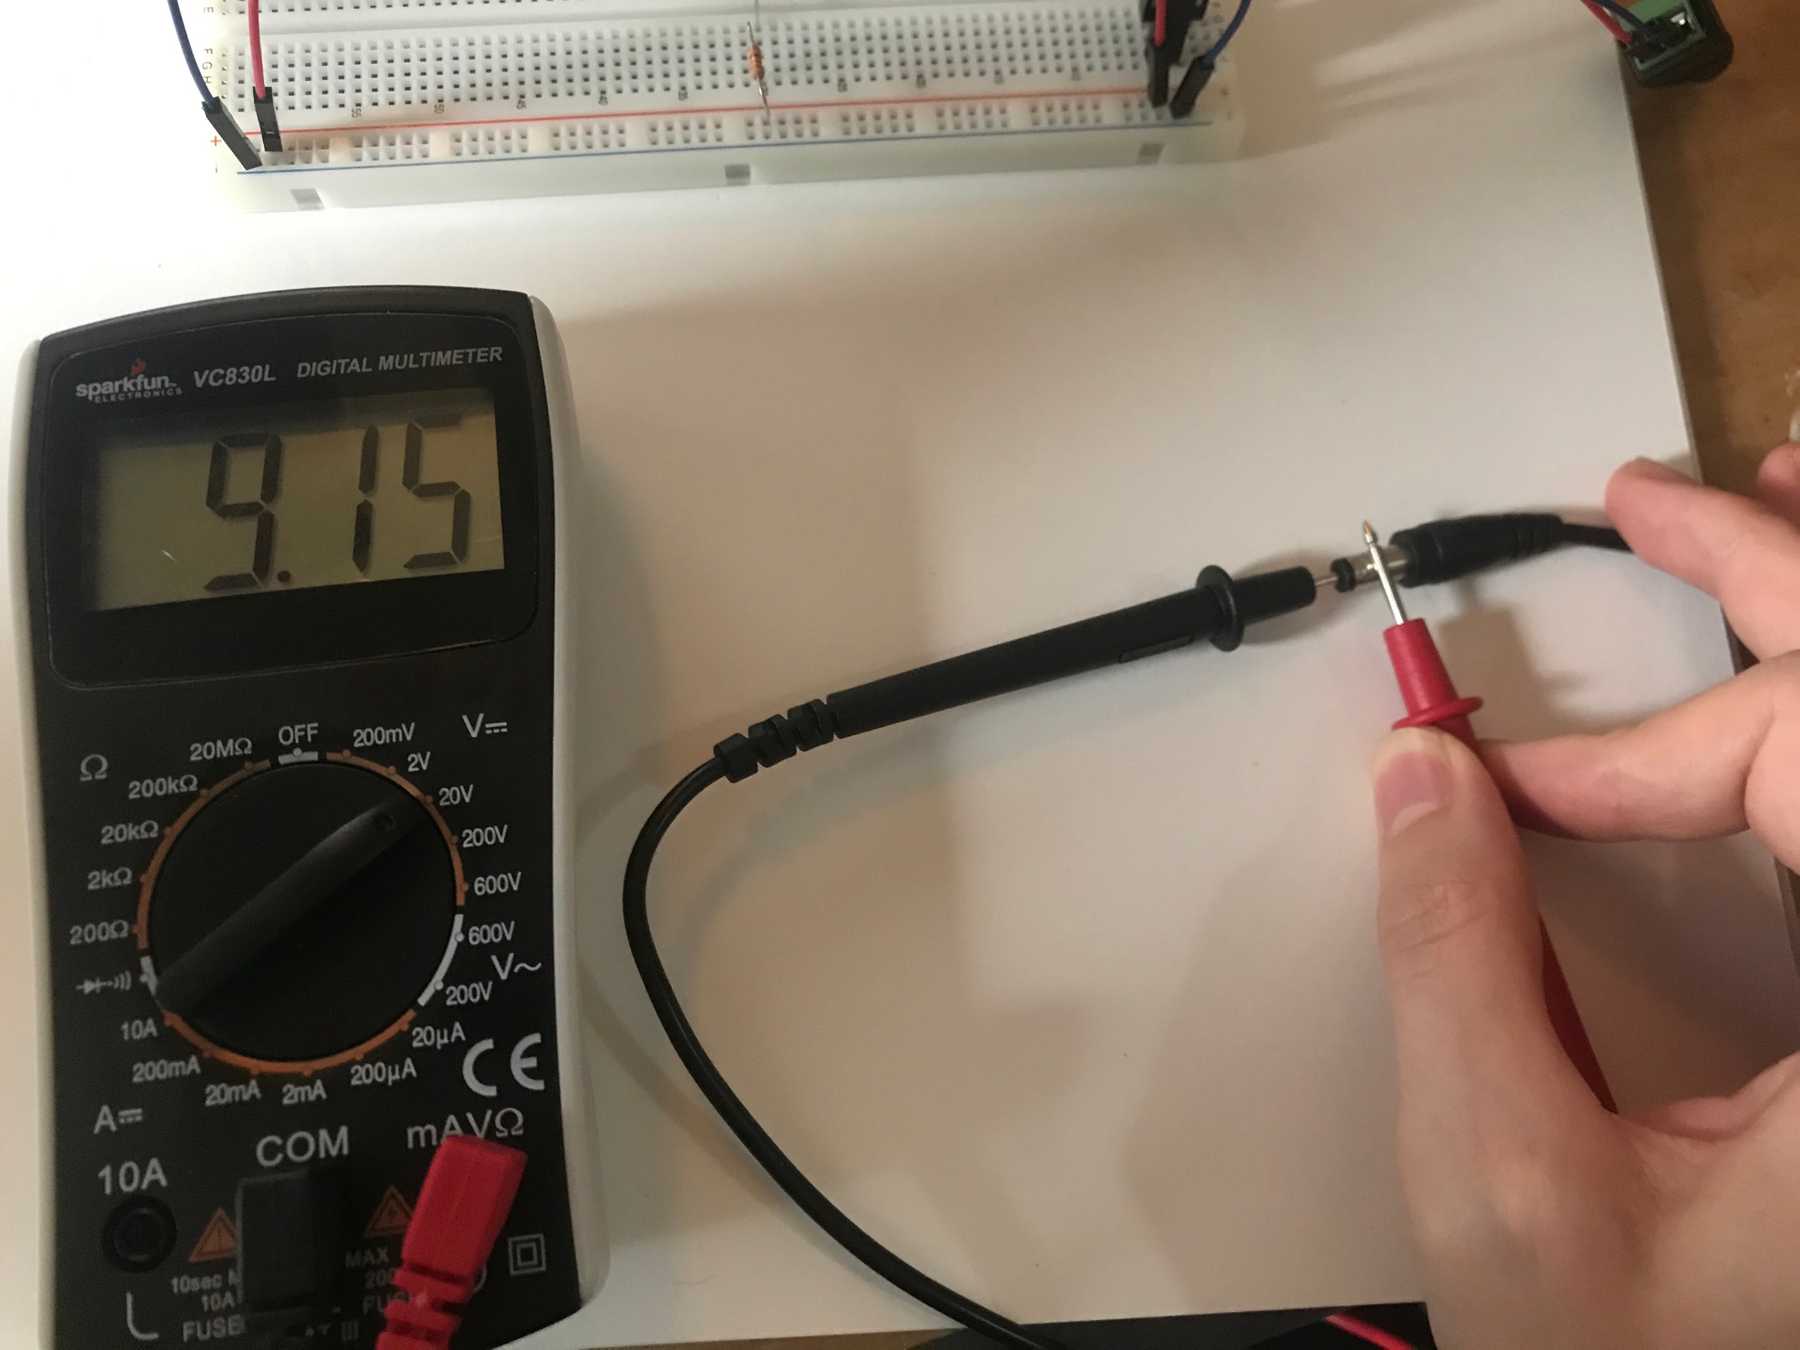 DC Voltage Measurement showing 9.15V with ground connected to the inner part of the jack